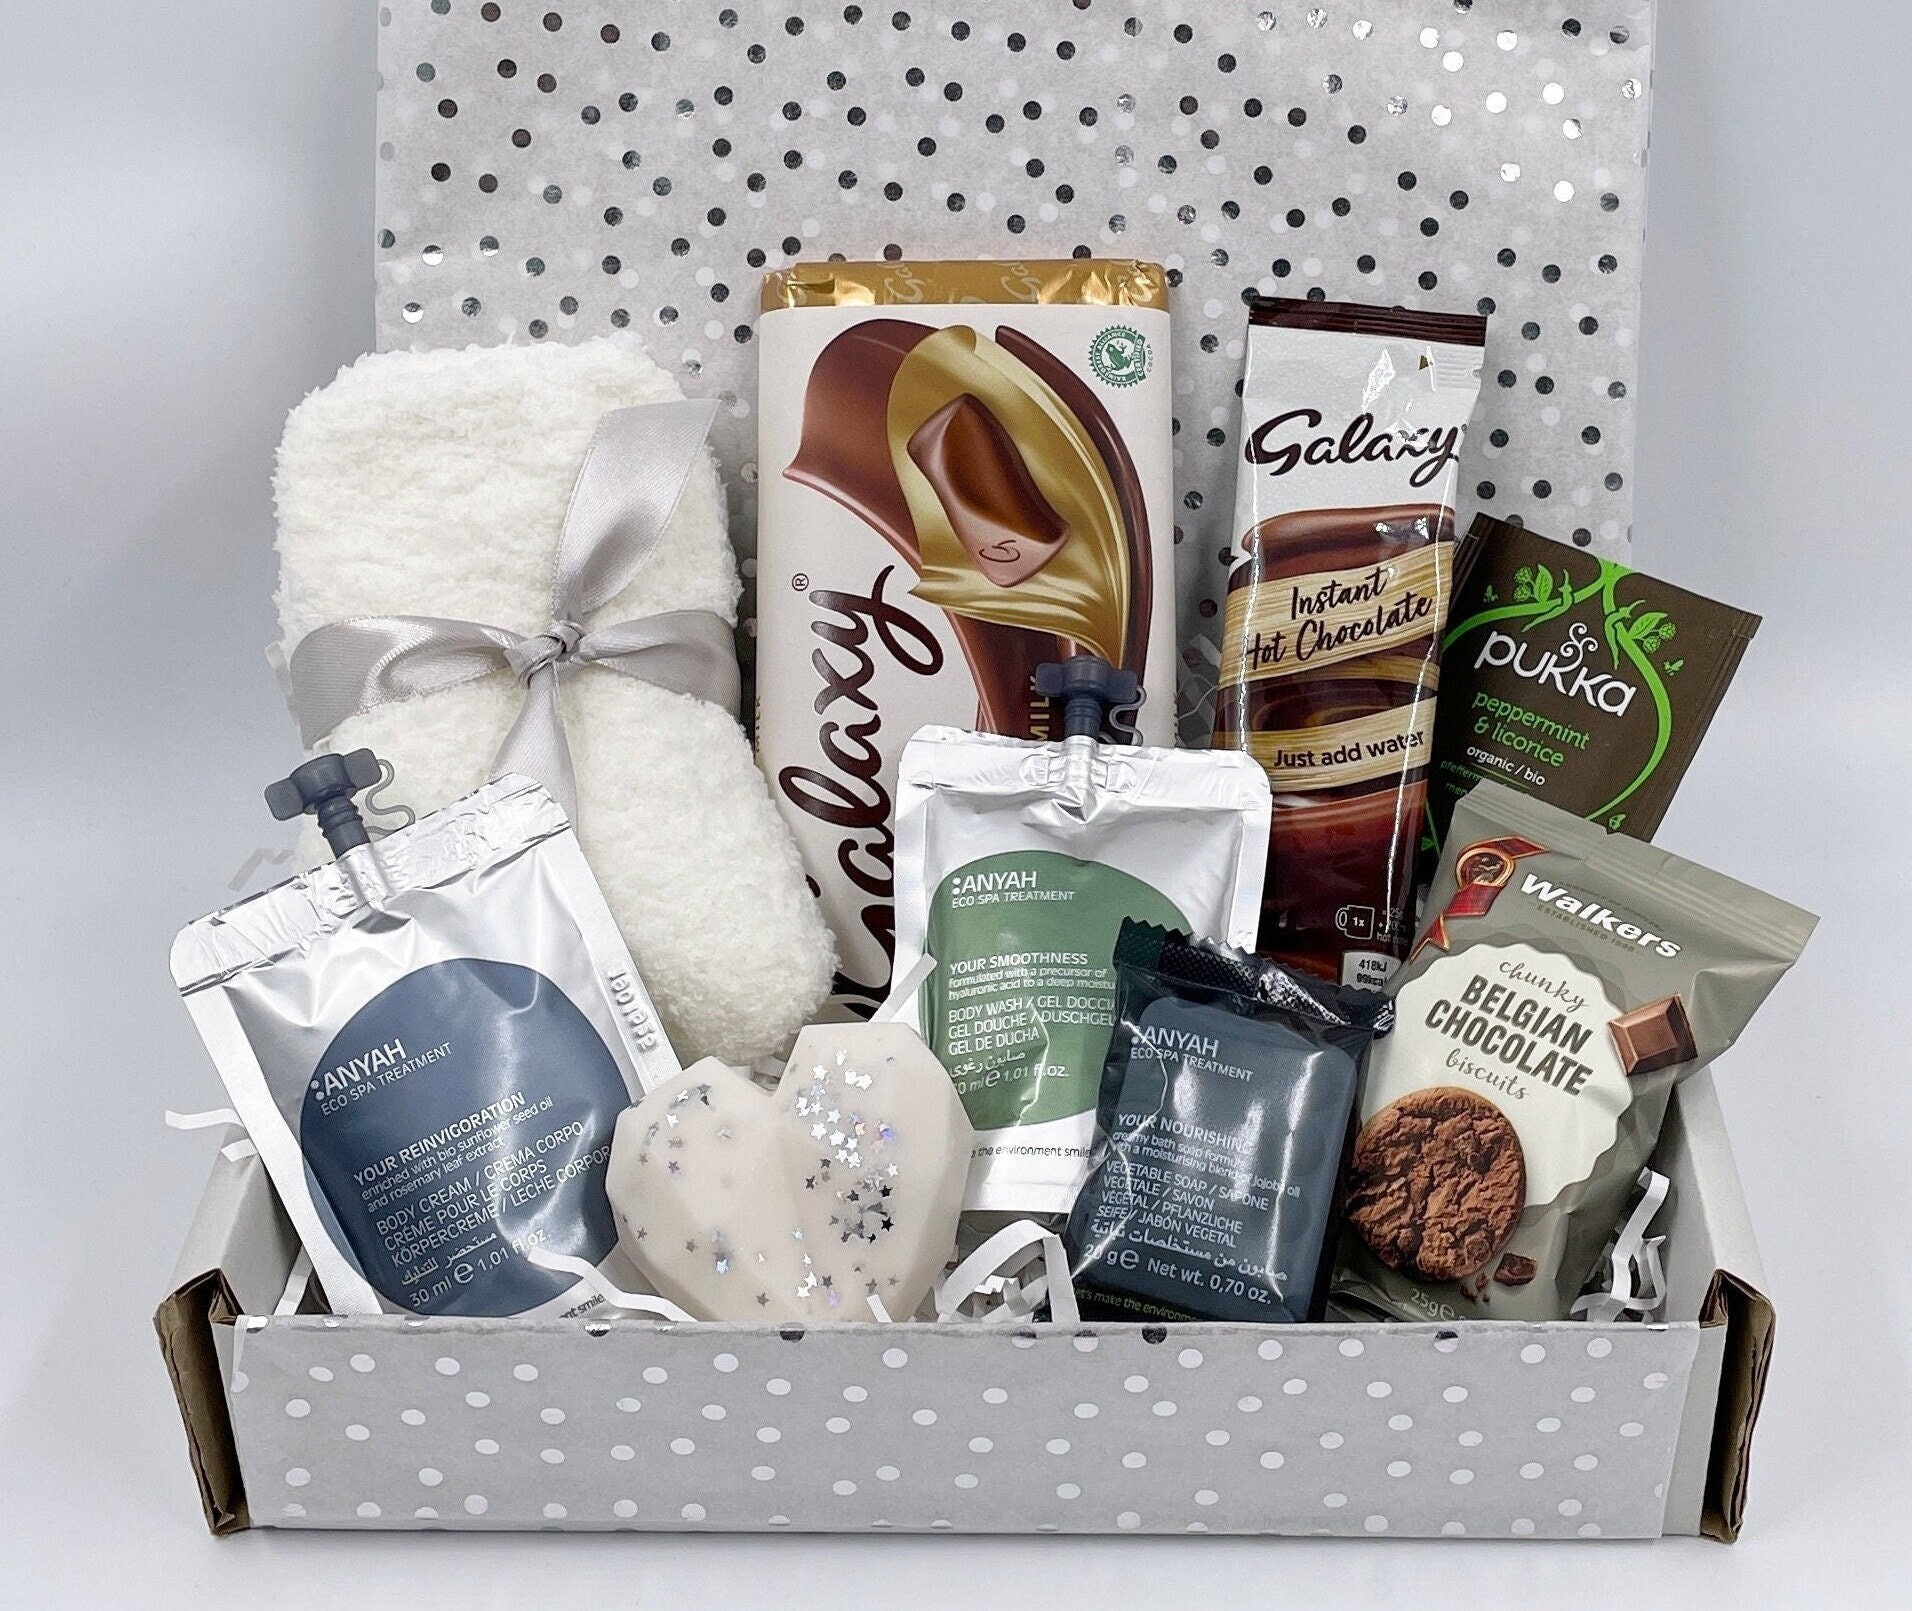 Get Well Soon Gifts for Women - Sympathy Gift Basket, Self Care Gifts for  Women, Sending a Hug Care Package, After Surgery Gifts, Feel Better Gifts